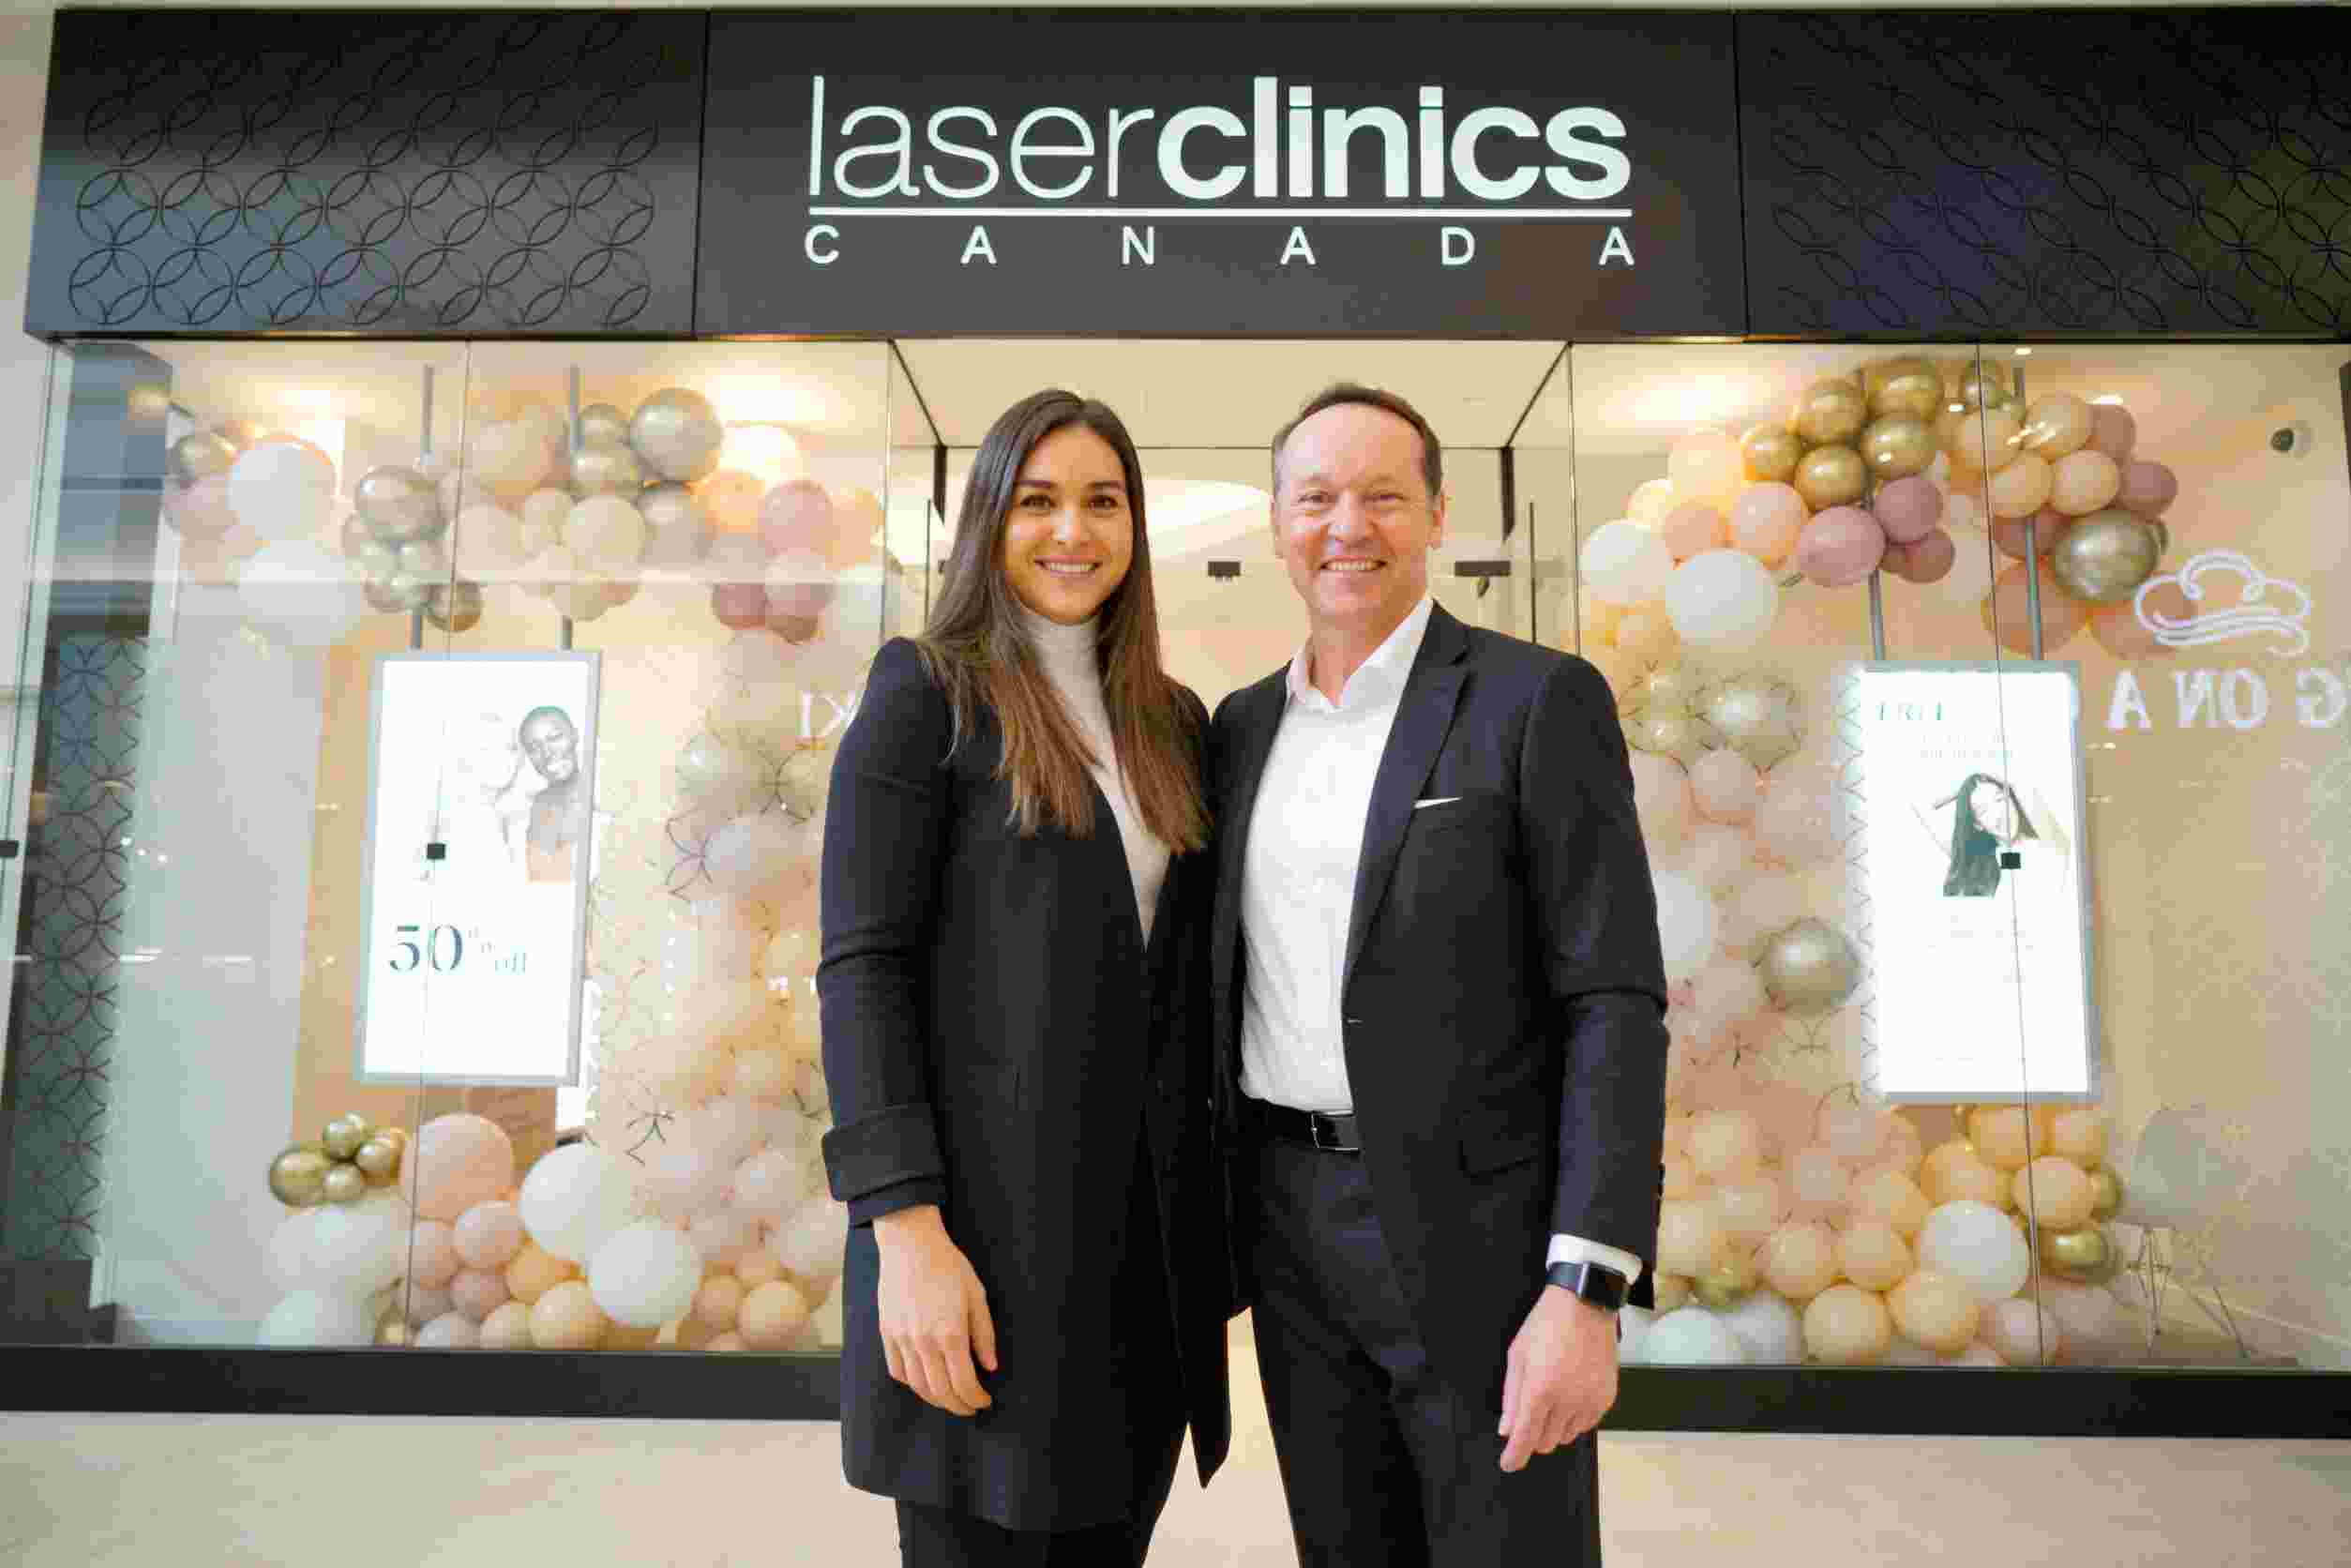 Laser Clinics, has arrived in Canada